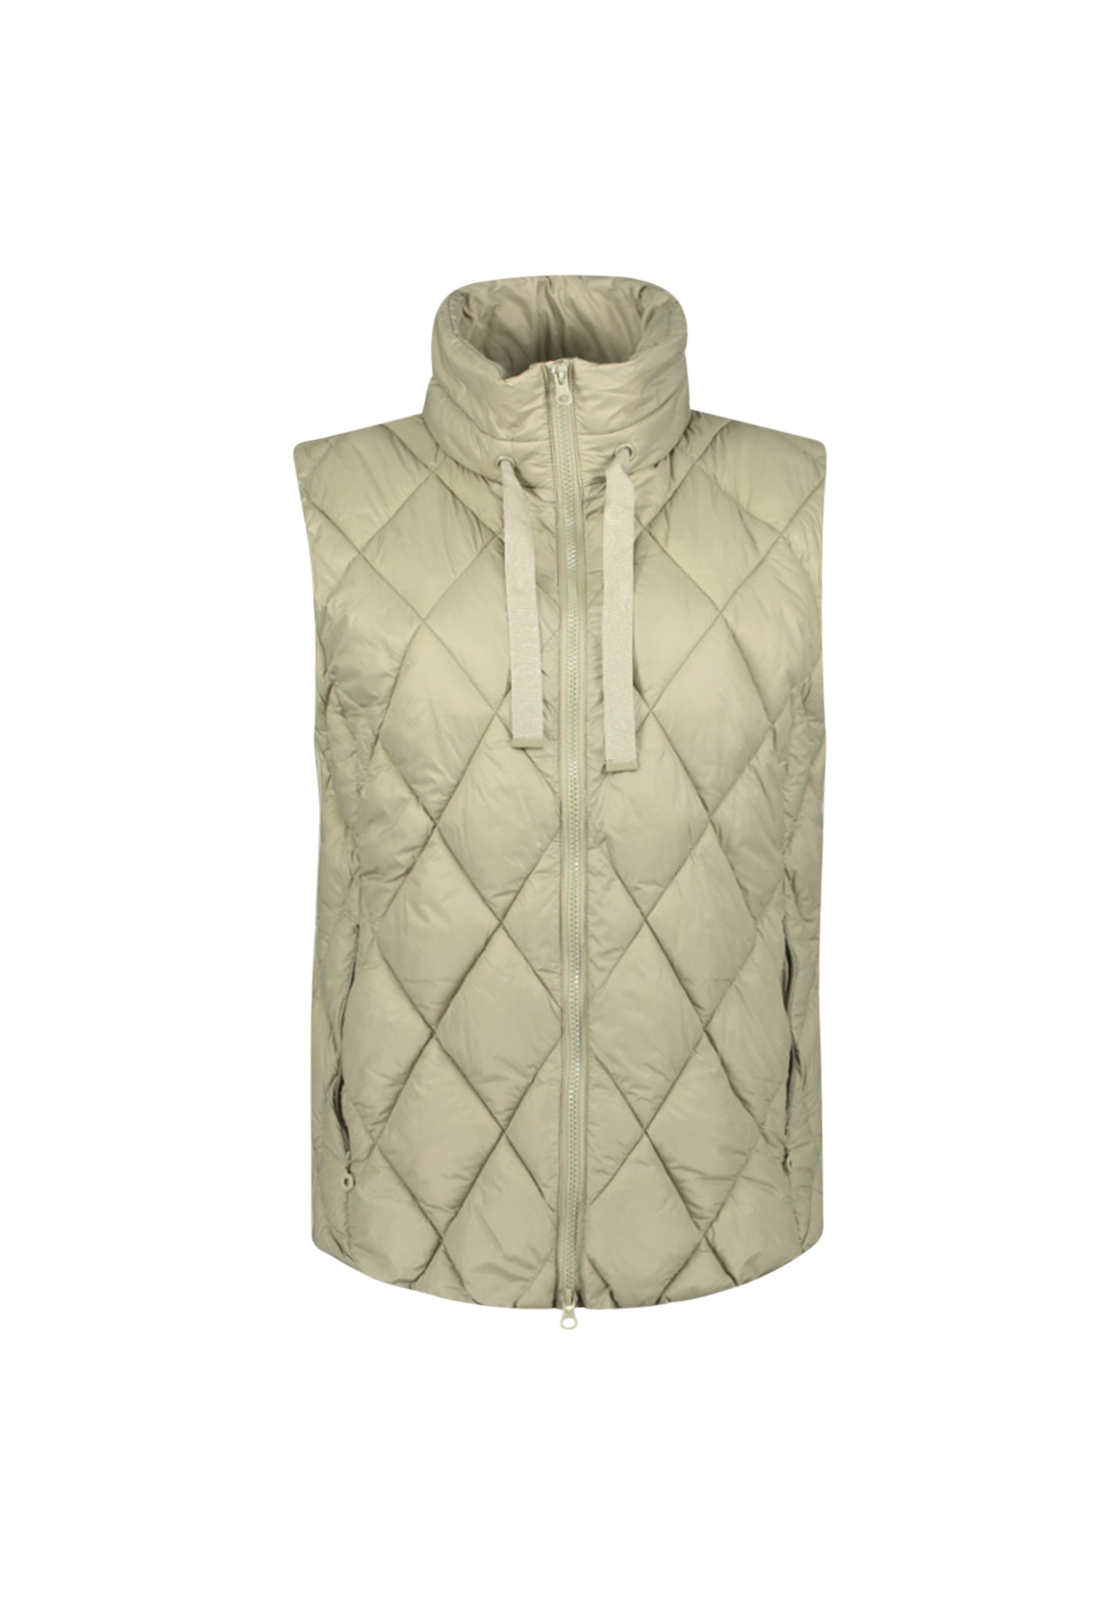 SuZa 8030-Quilted Waistcoat Dune Grass